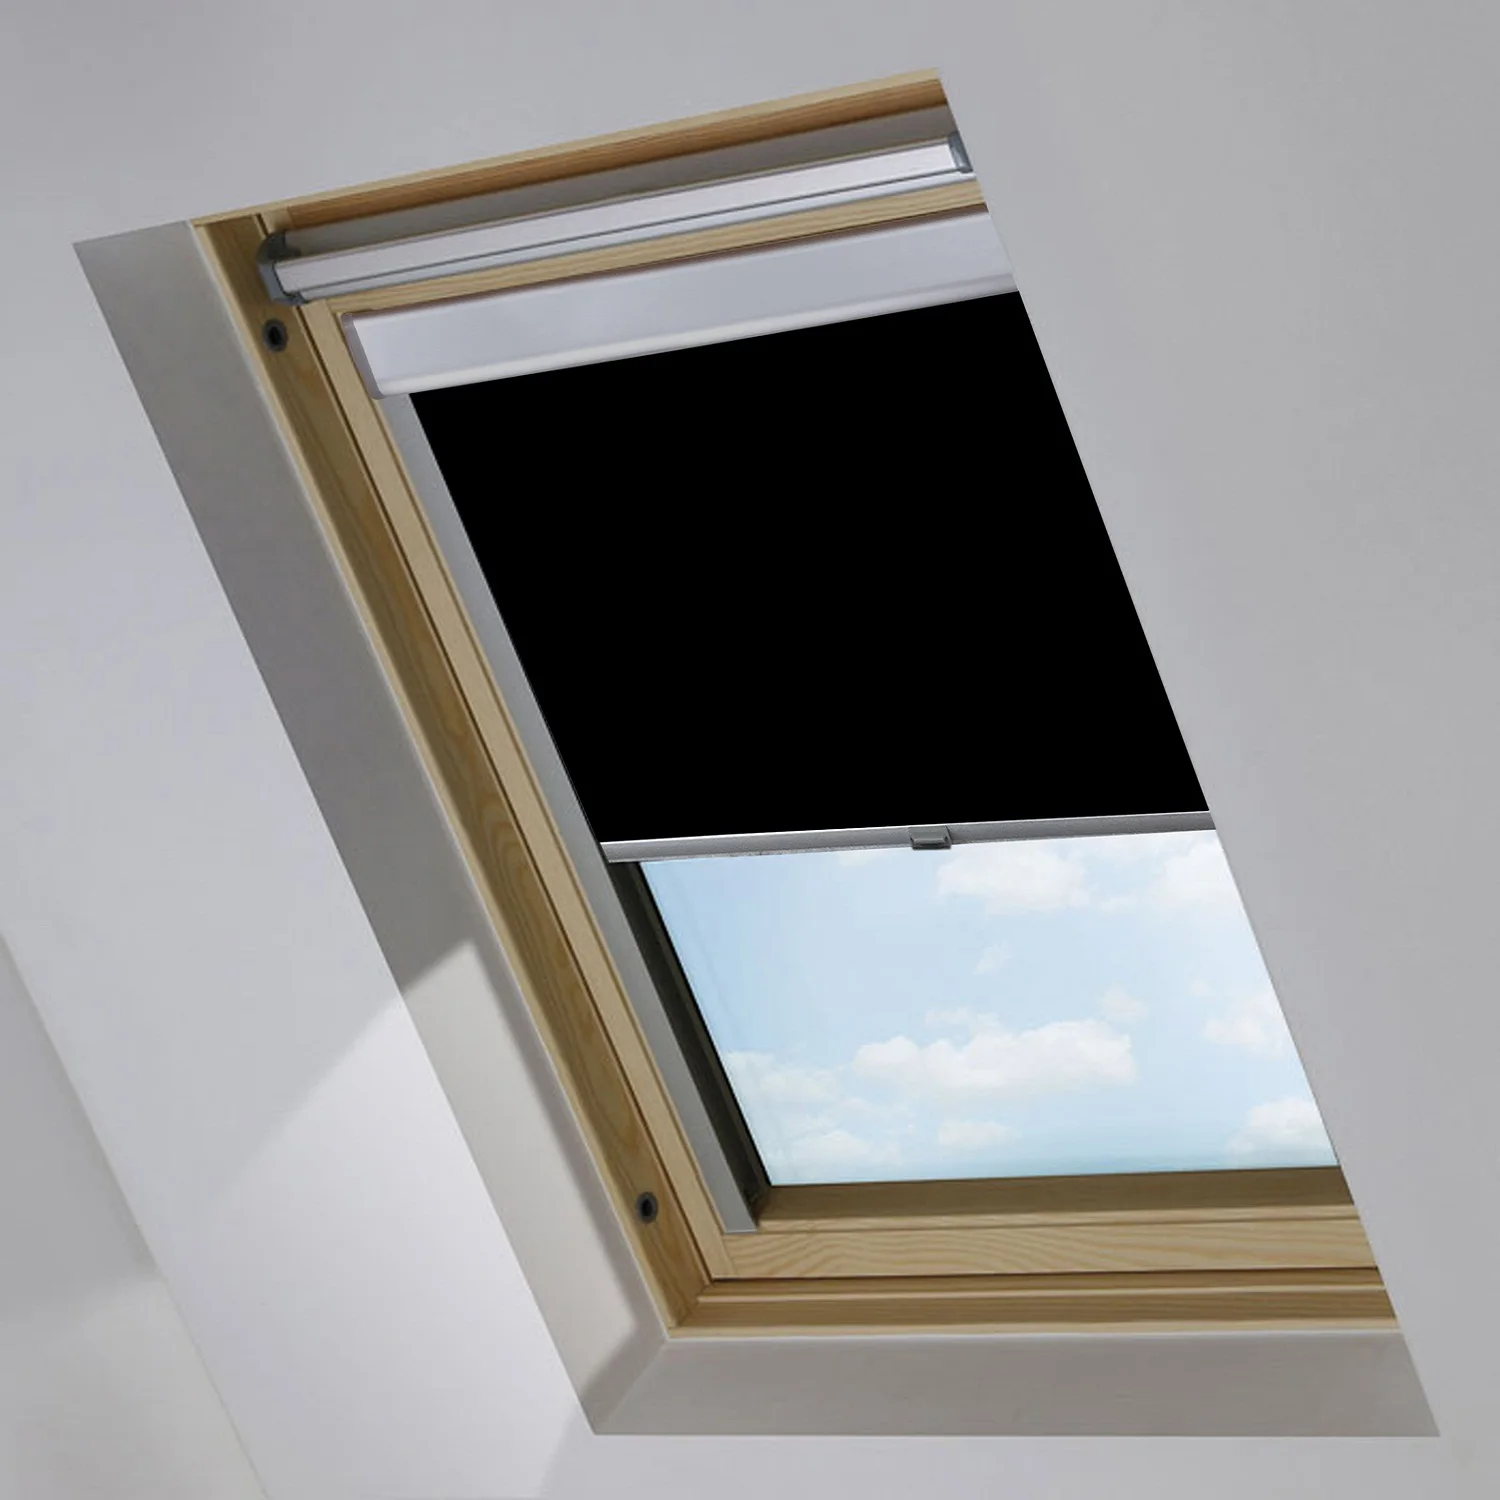 show original title Details about   Skylight Thermal Honeycomb Pleated Folding Roller Blind for Velux BJ 2013-100% Blackout 